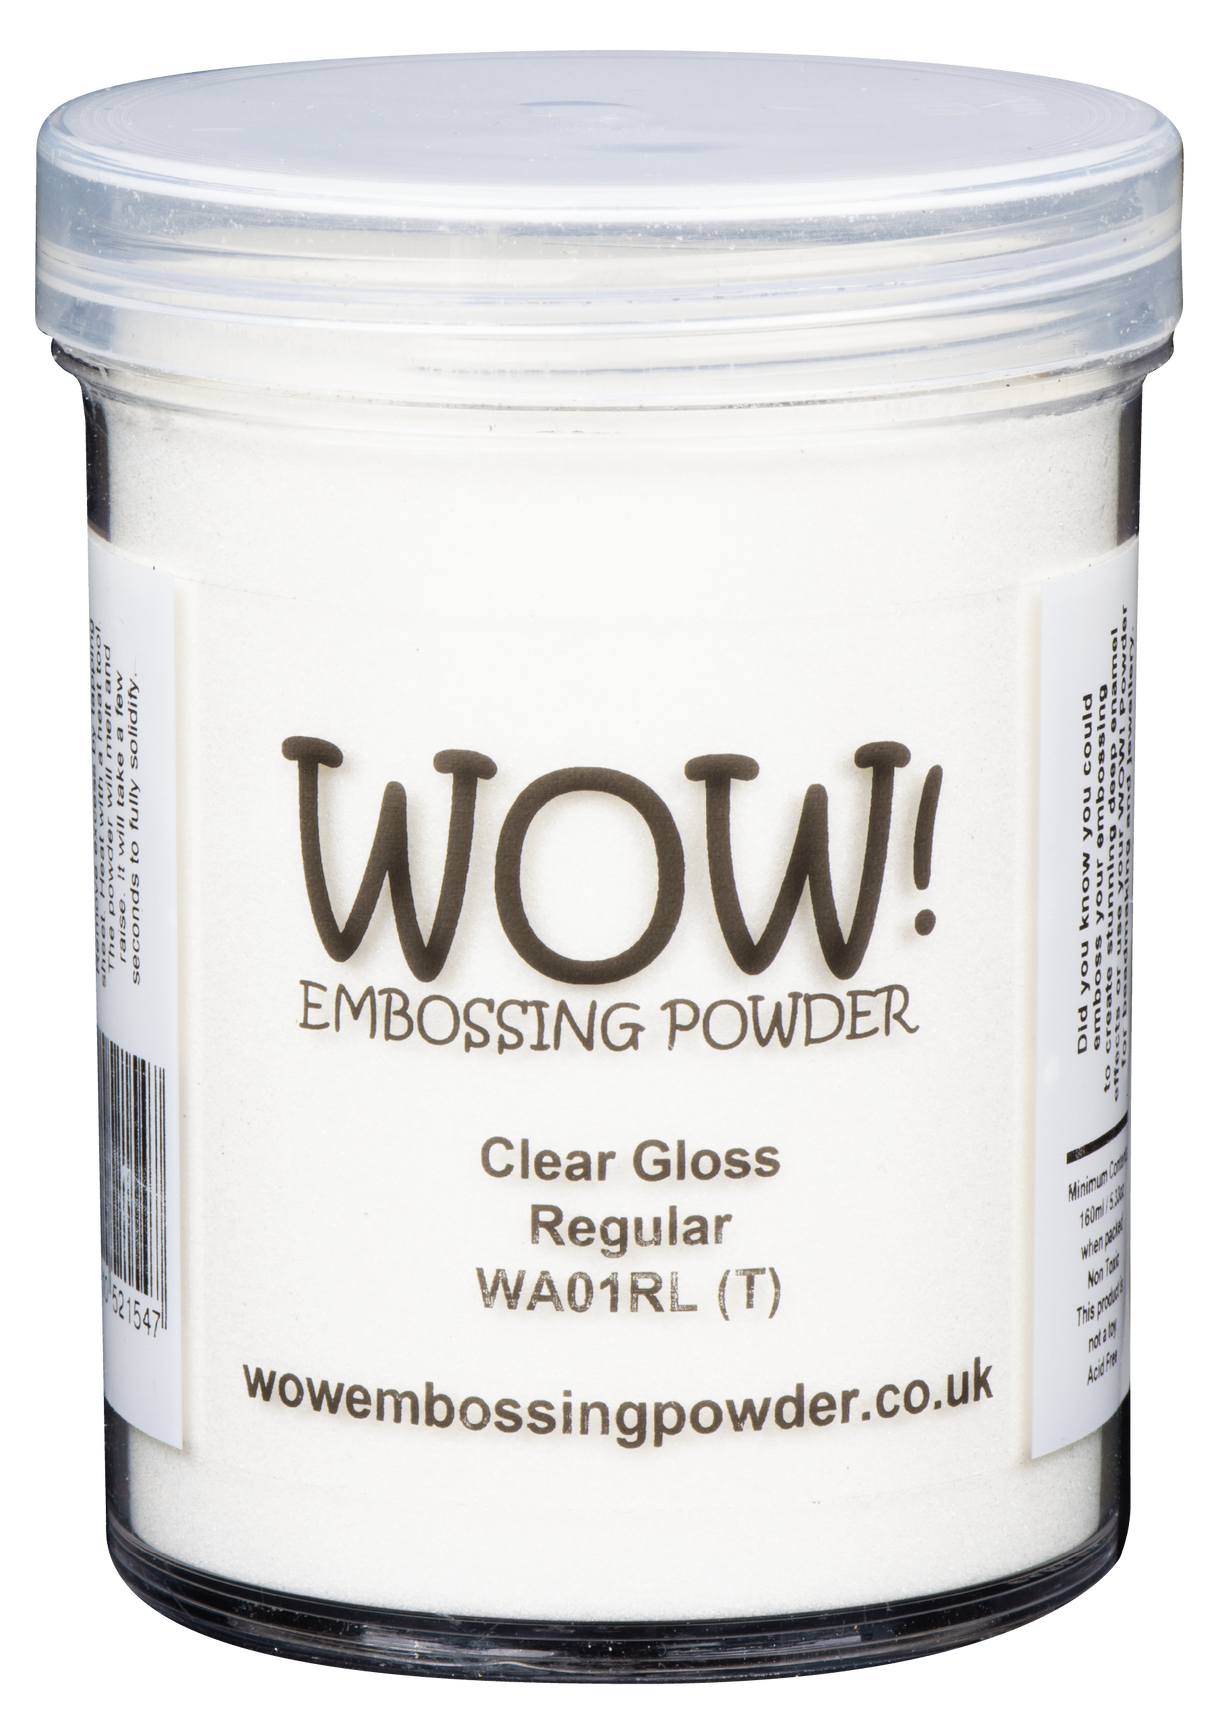 WOW, Embossing Powder, Clear Gloss Regular Tall Container